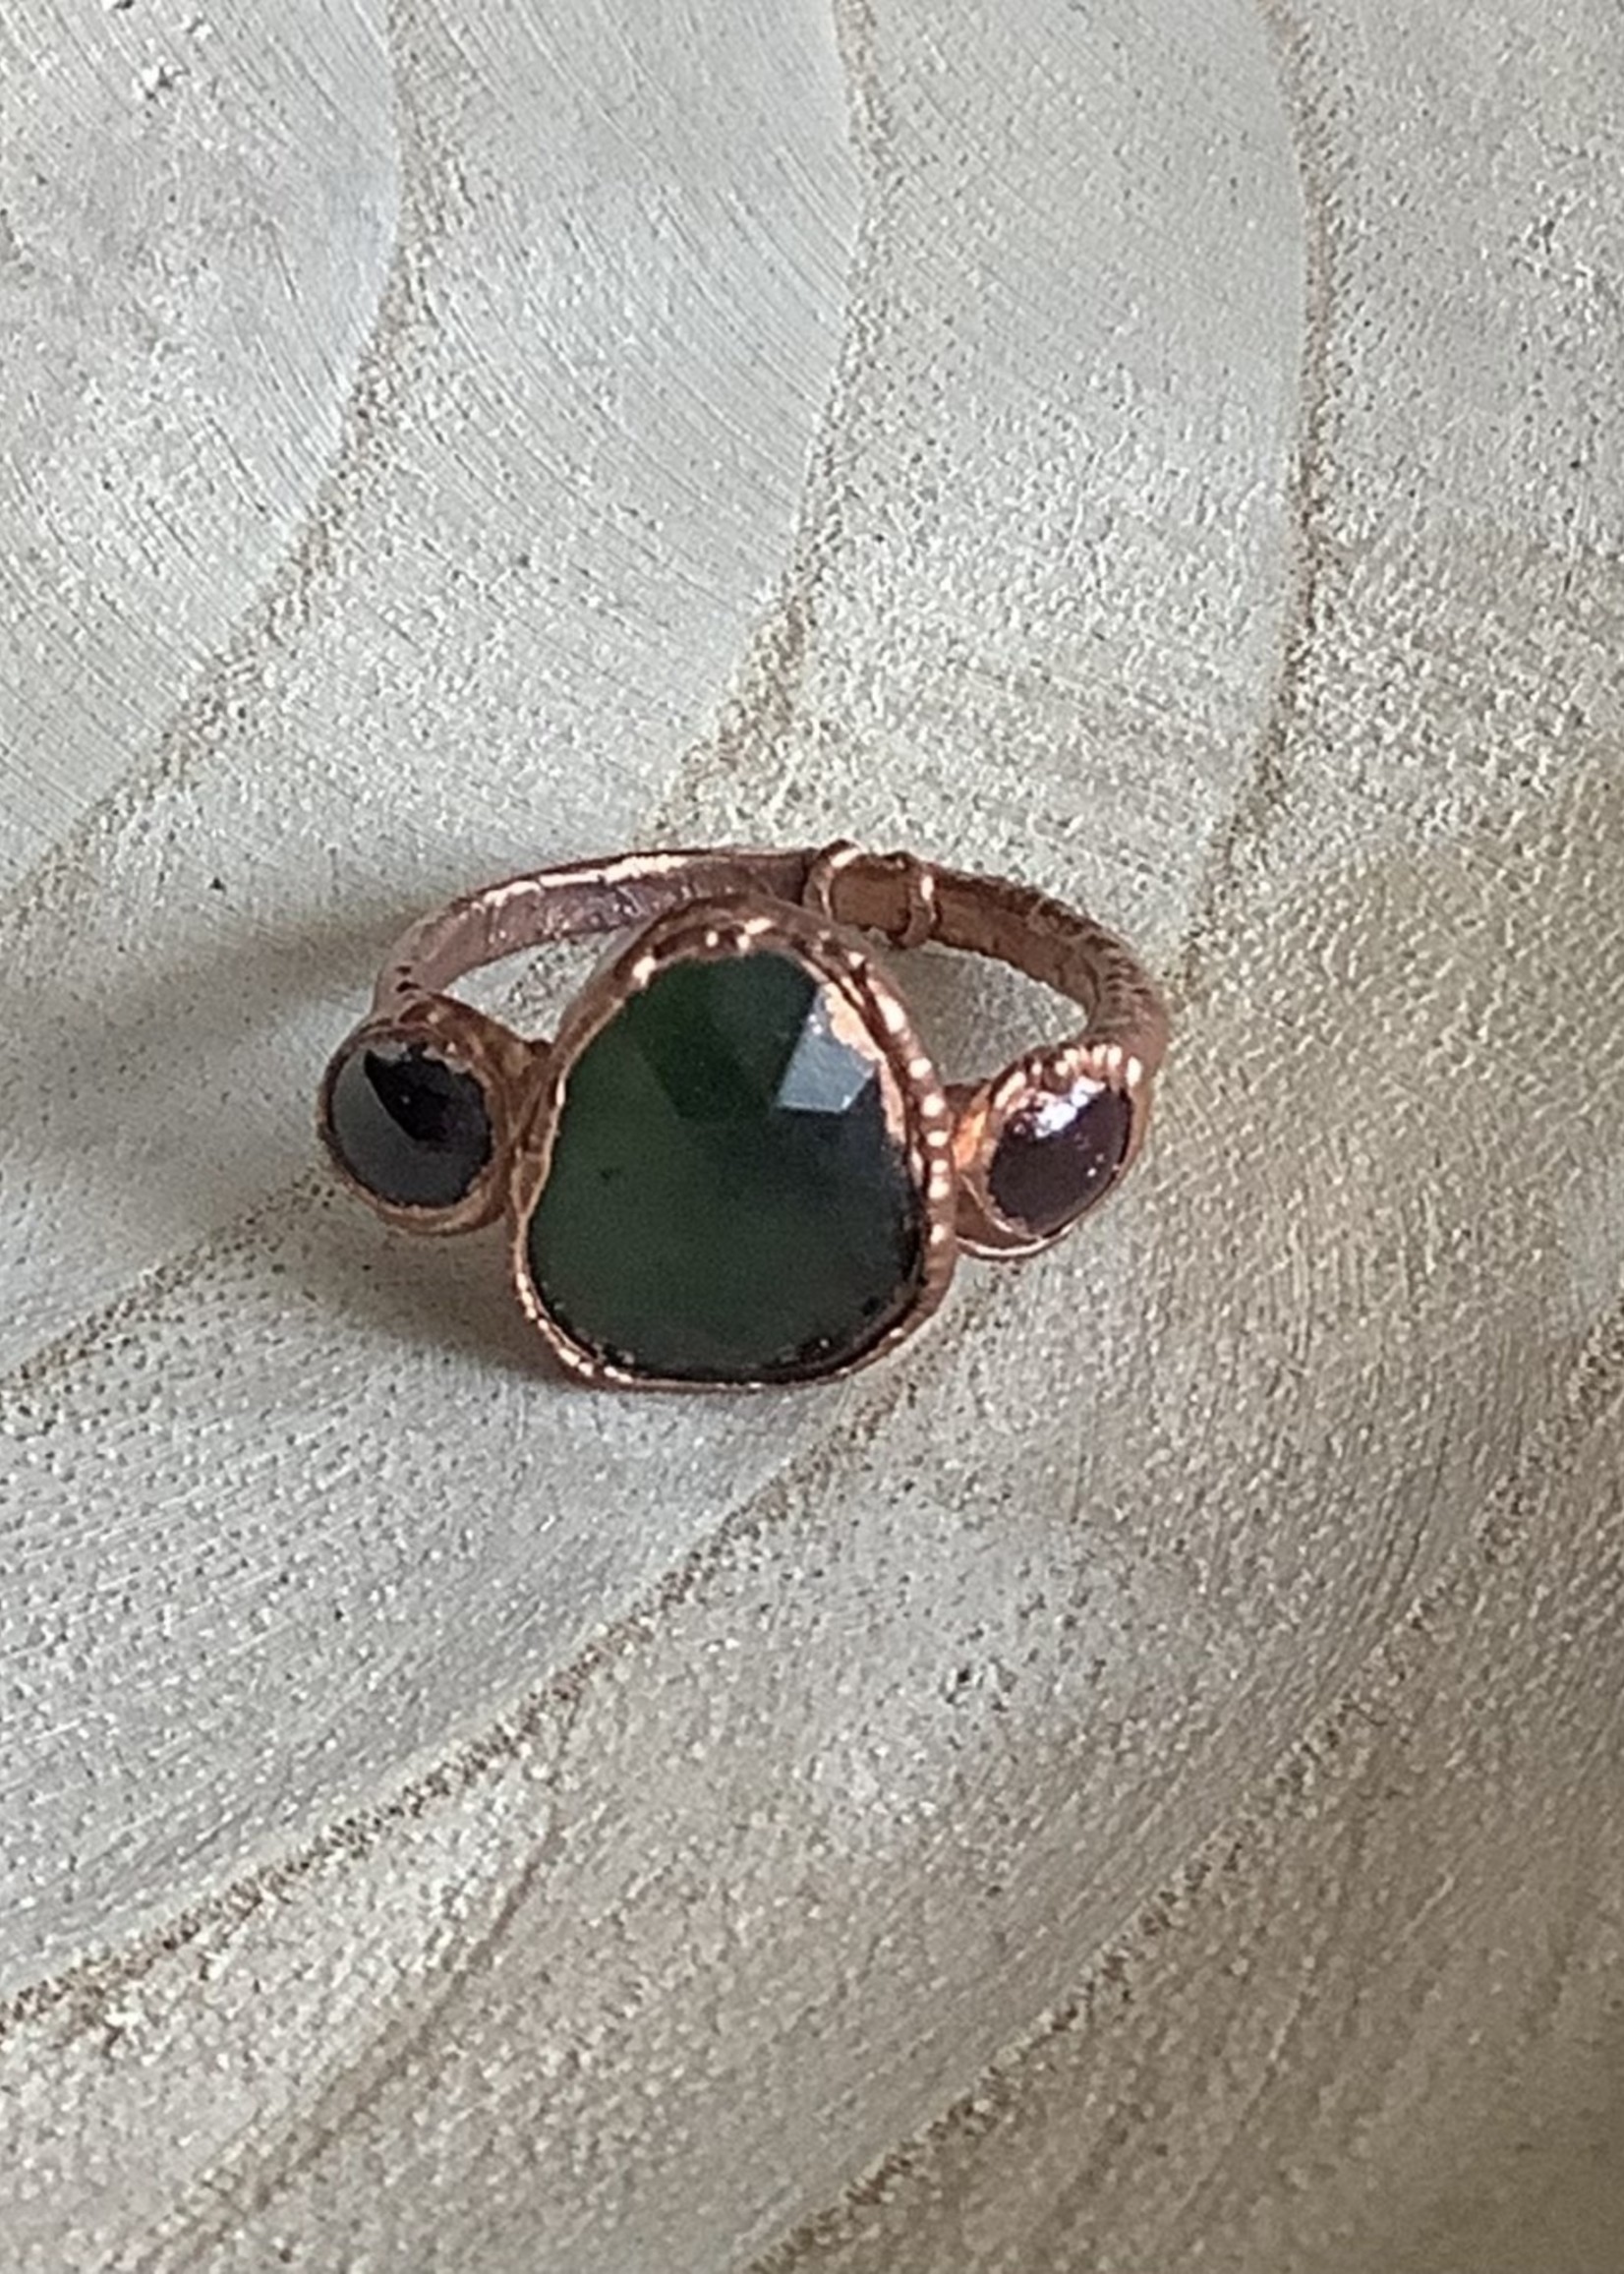 Sapphire and Garnet Copper Ring Size 6